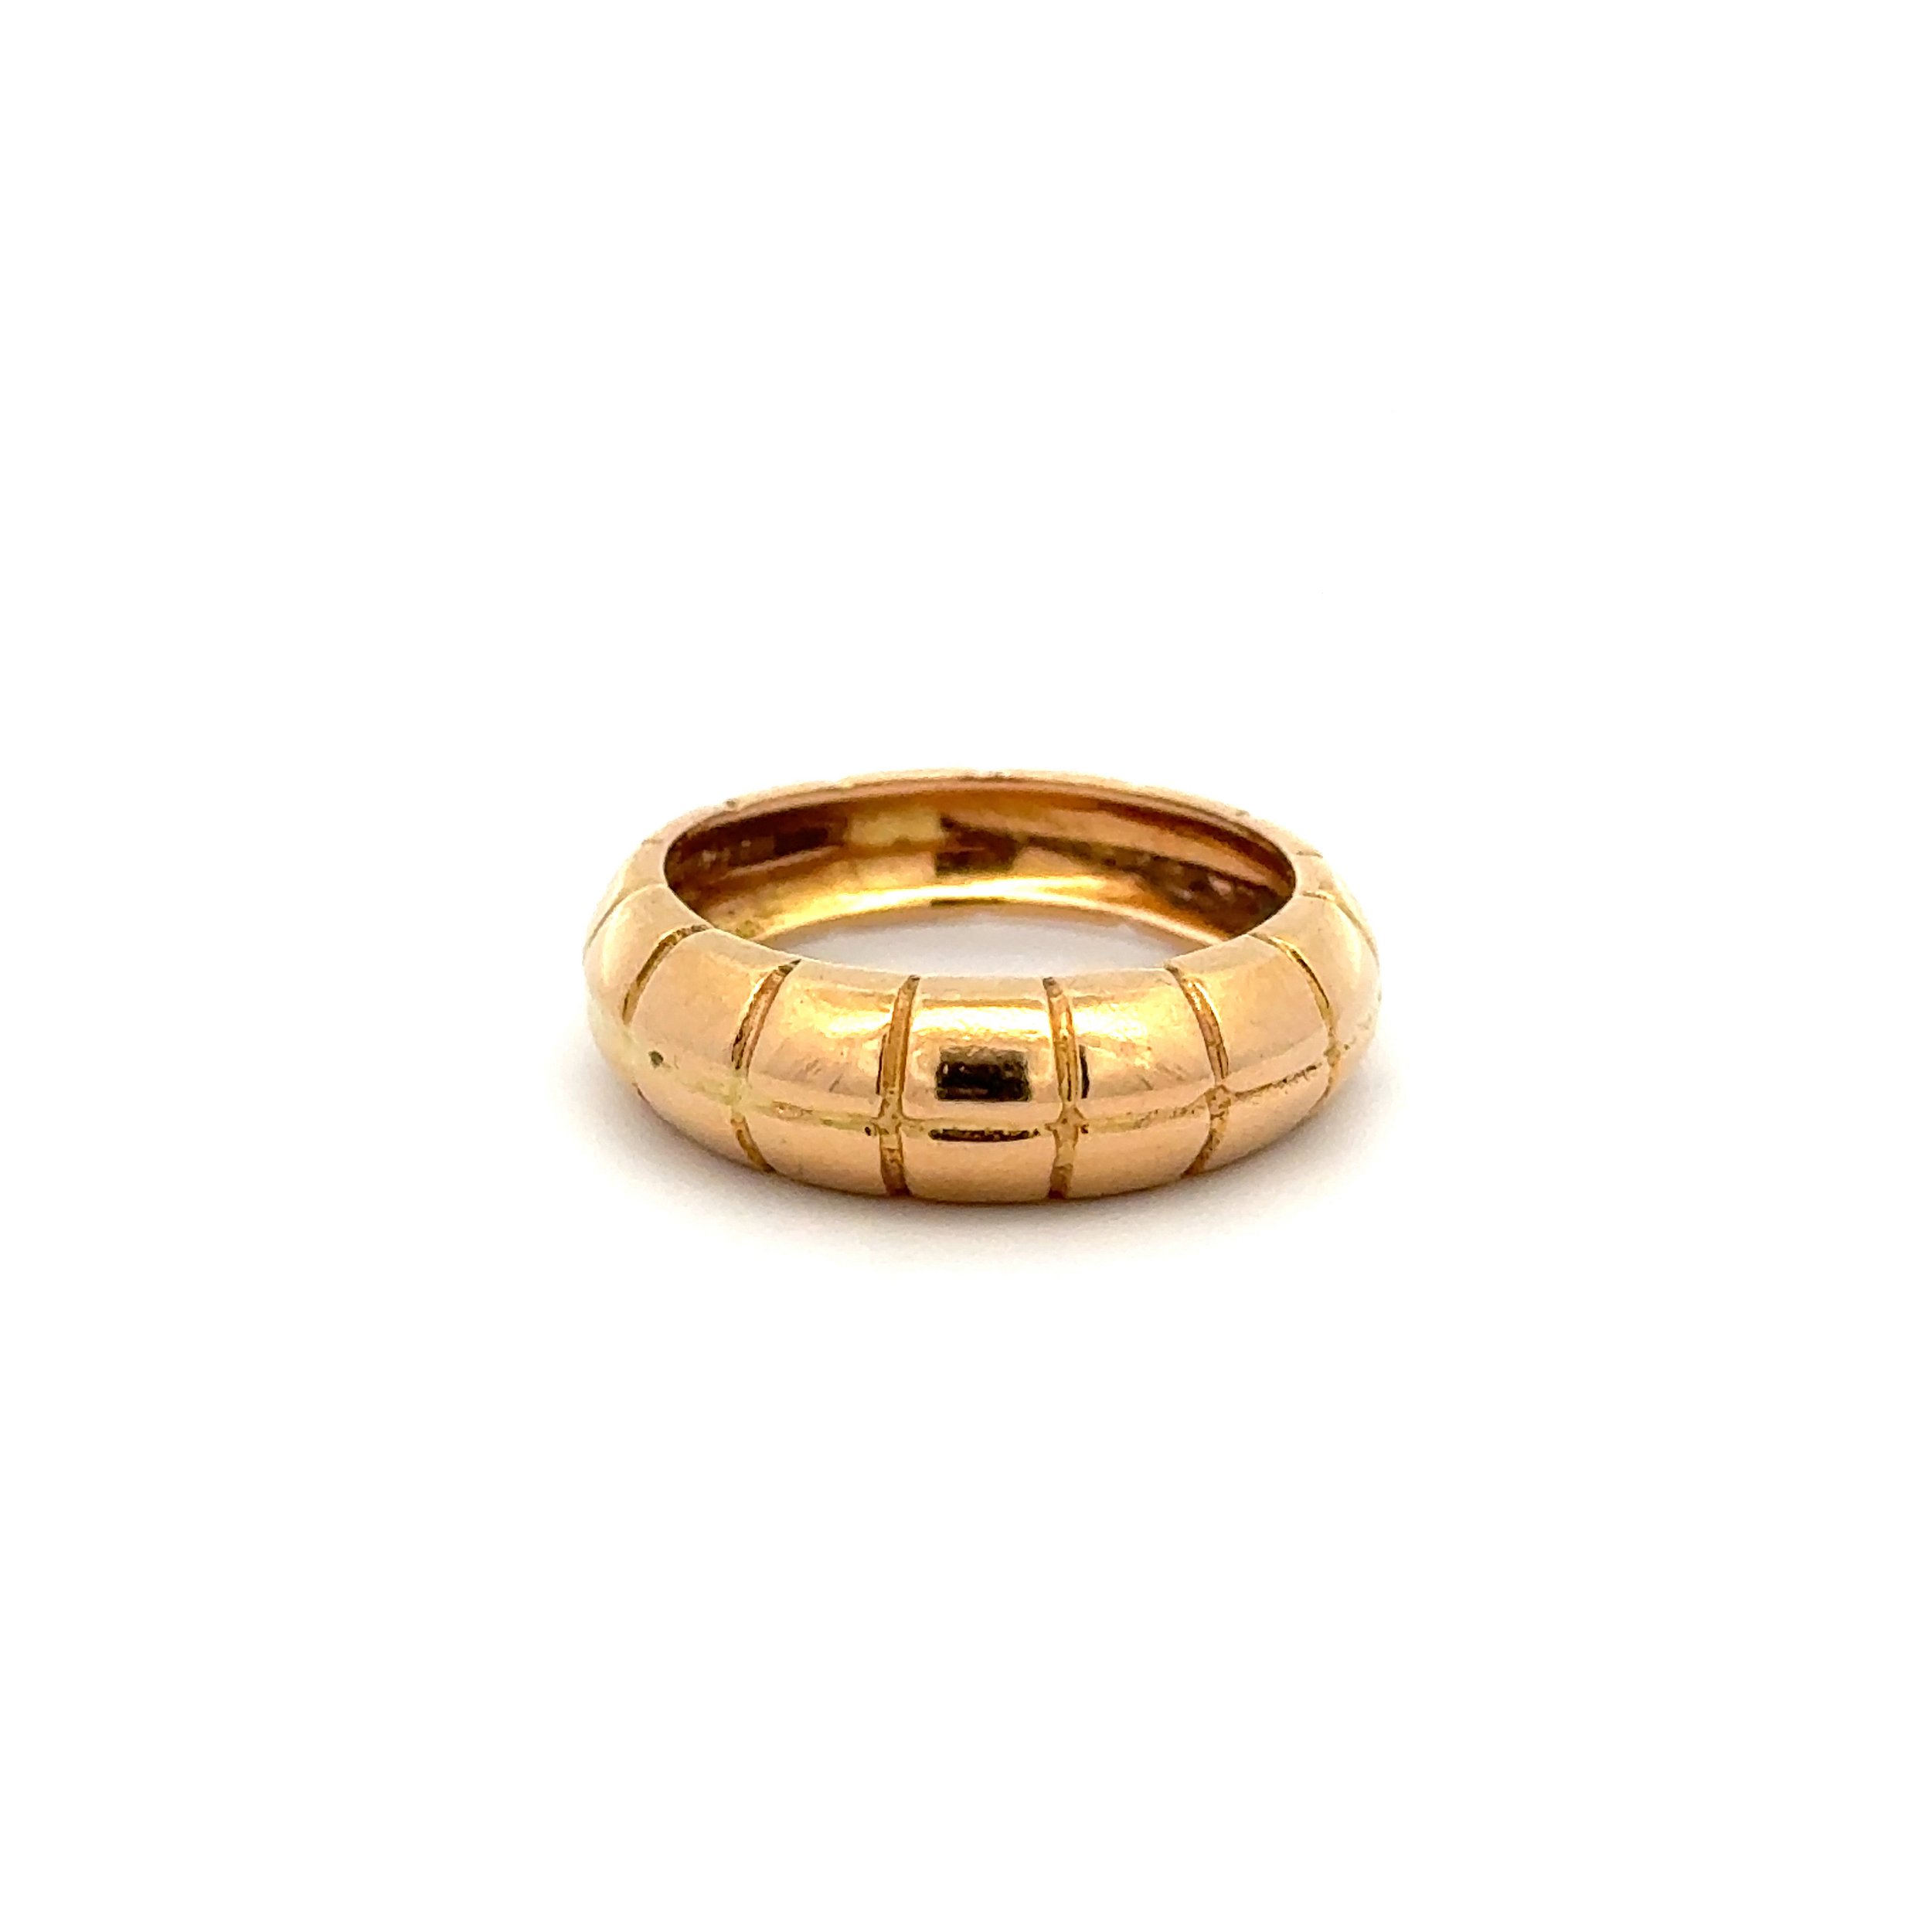 14K RG Italian Bamboo Pattern 6mm Hollow Dome Ring 4.9g, s6